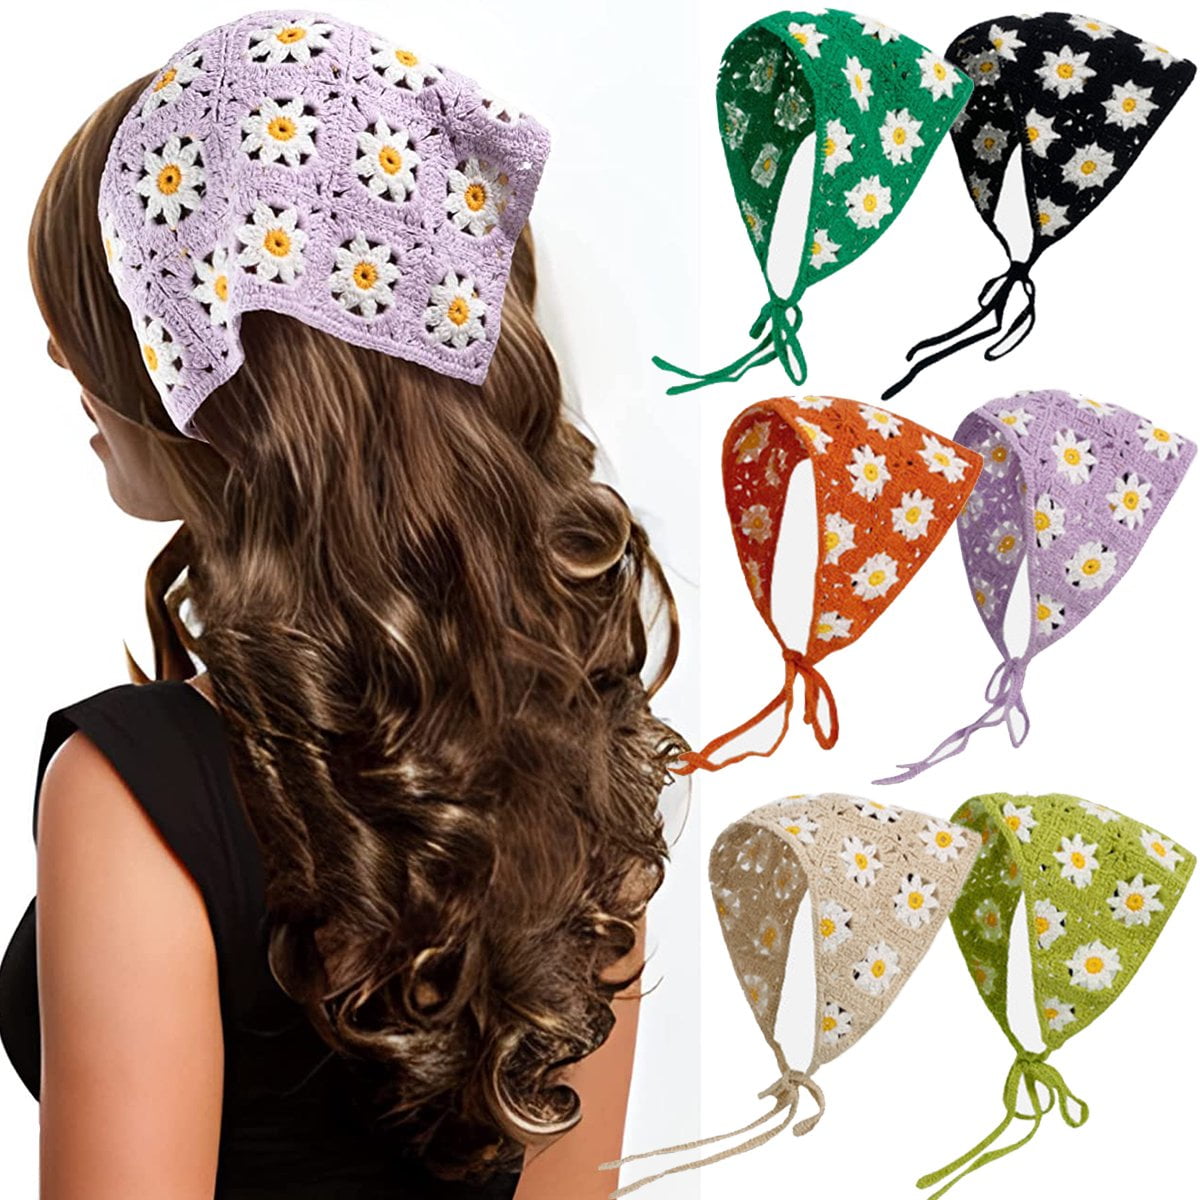 32 Bandana Hairstyles That Prove It's the Perfect Hair Accessory